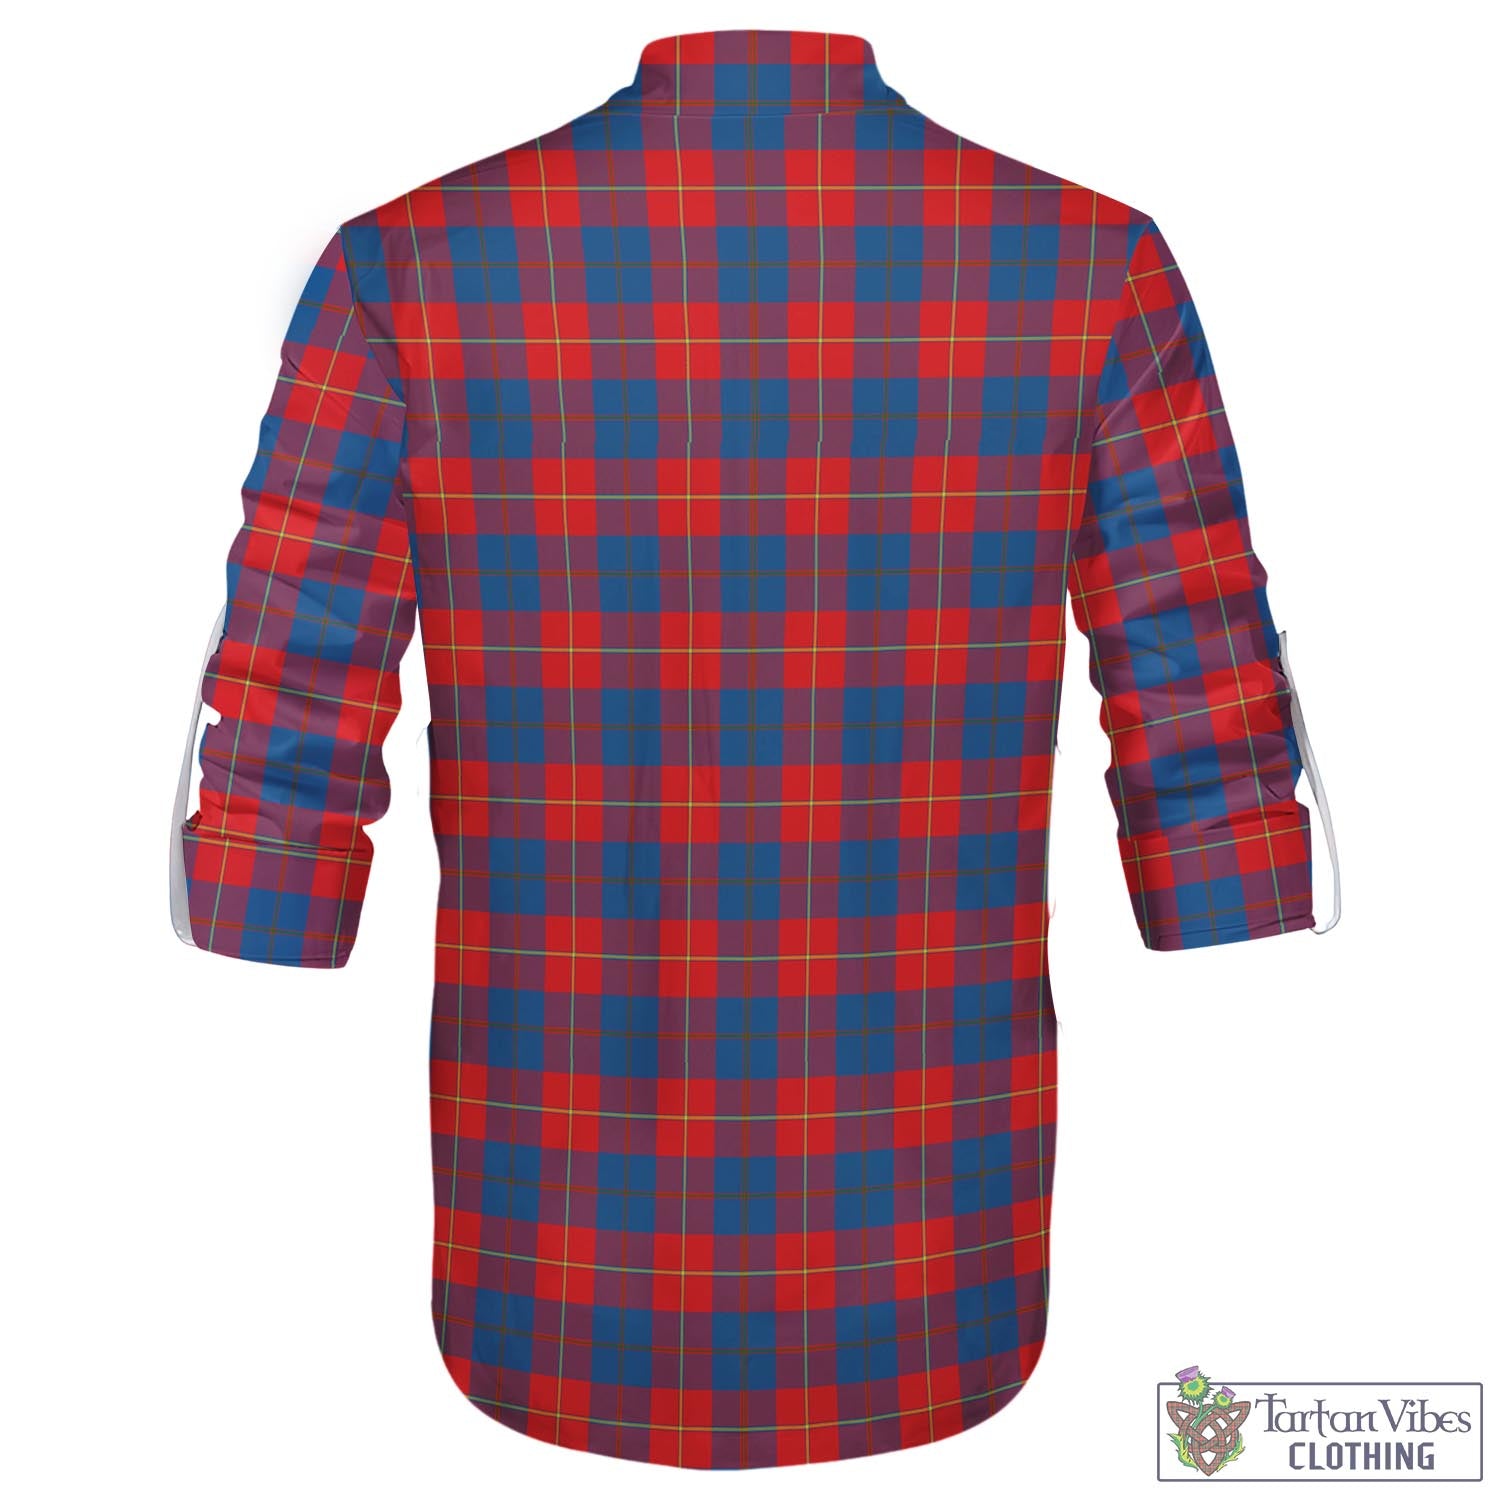 Tartan Vibes Clothing Galloway Red Tartan Men's Scottish Traditional Jacobite Ghillie Kilt Shirt with Family Crest